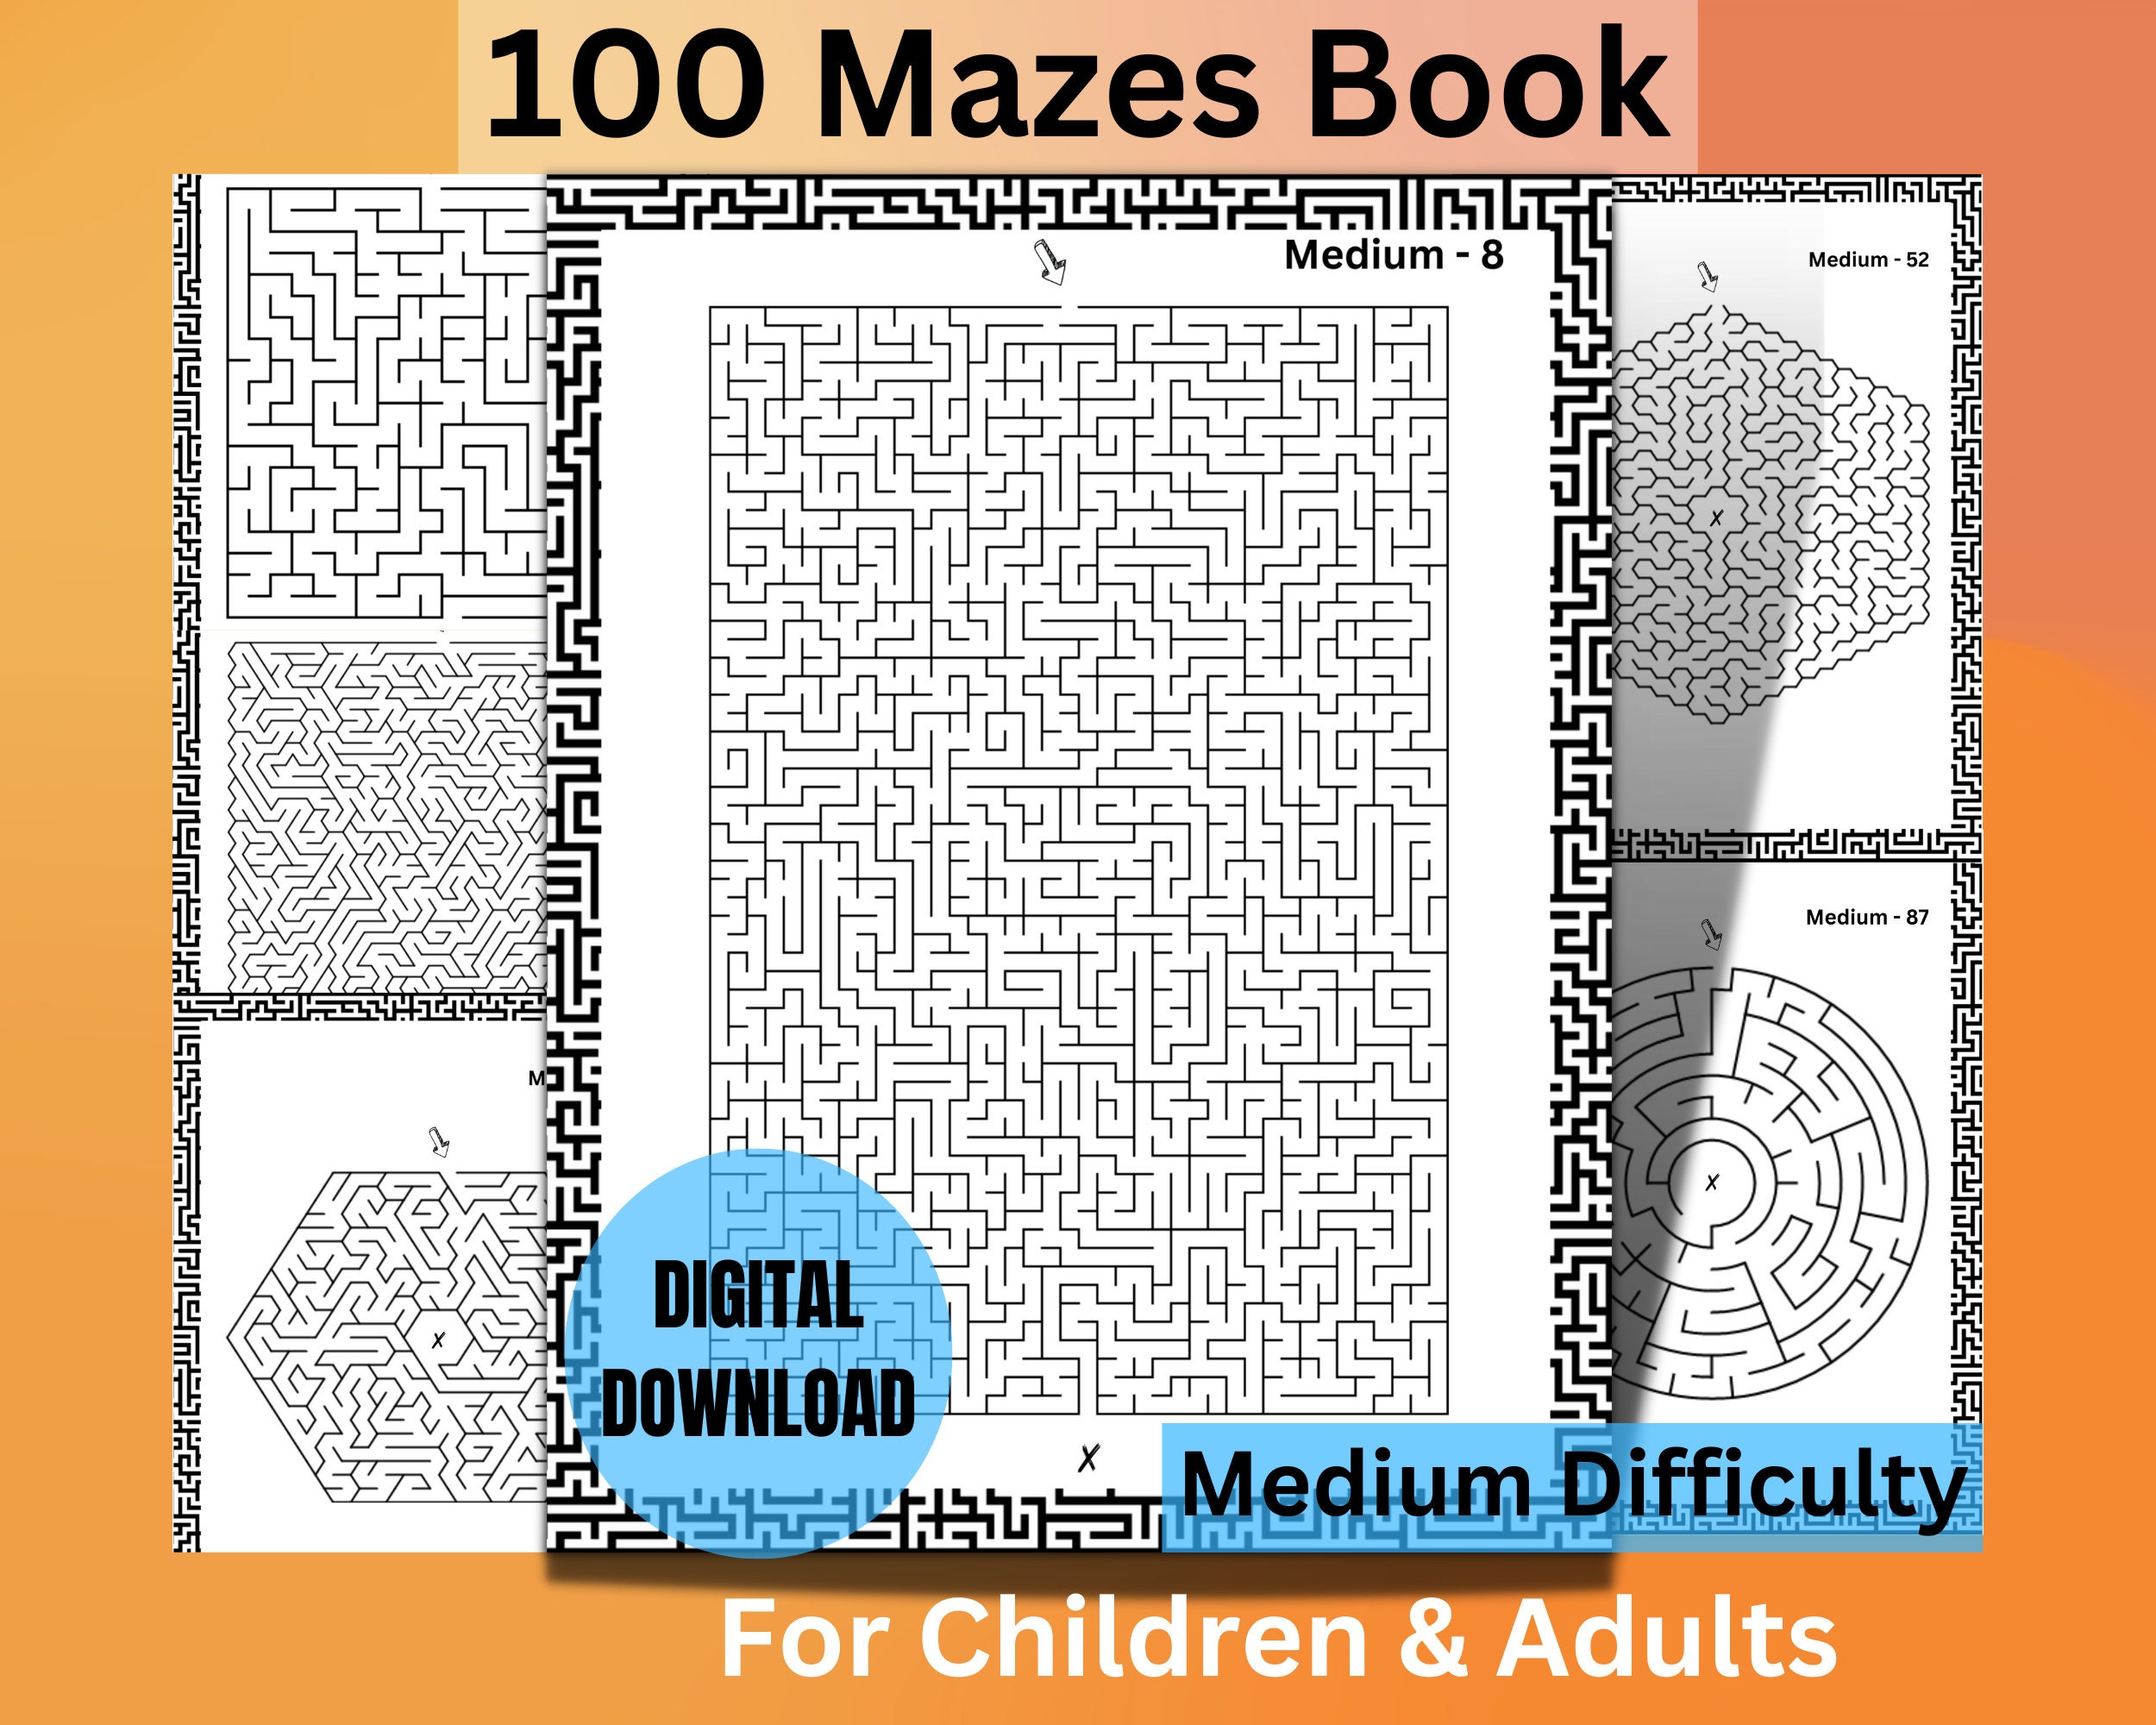 Mazes Activity Book For Kids Ages 4-8: 26 Fun Mazes for Kids 4-6